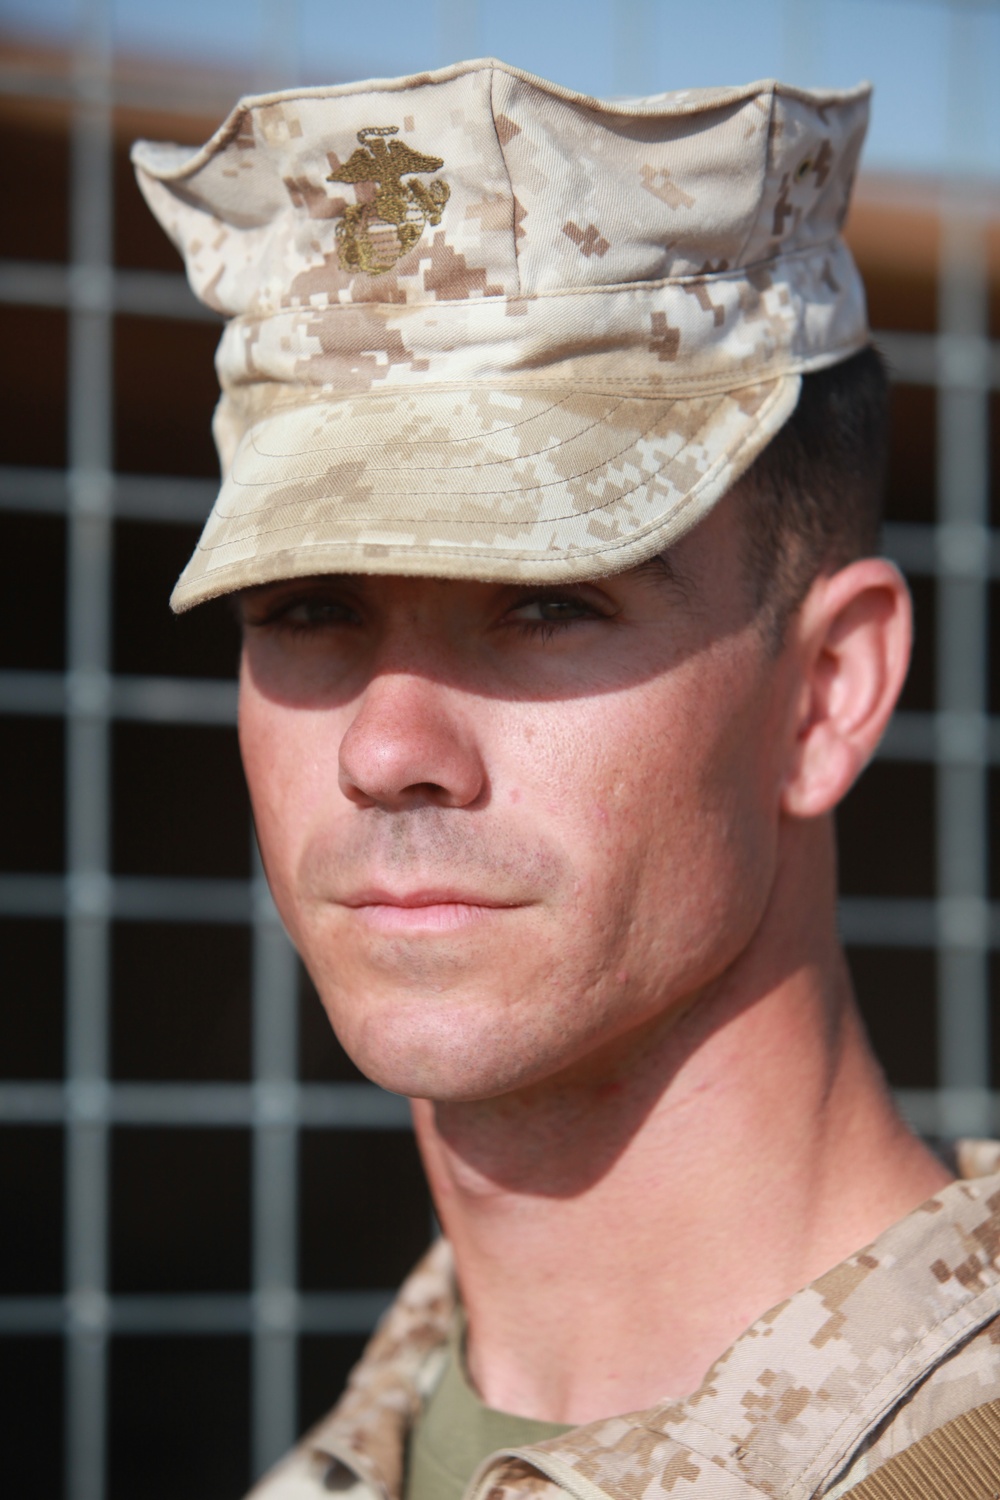 DVIDS - News - New York Marine follows father's footsteps, wears